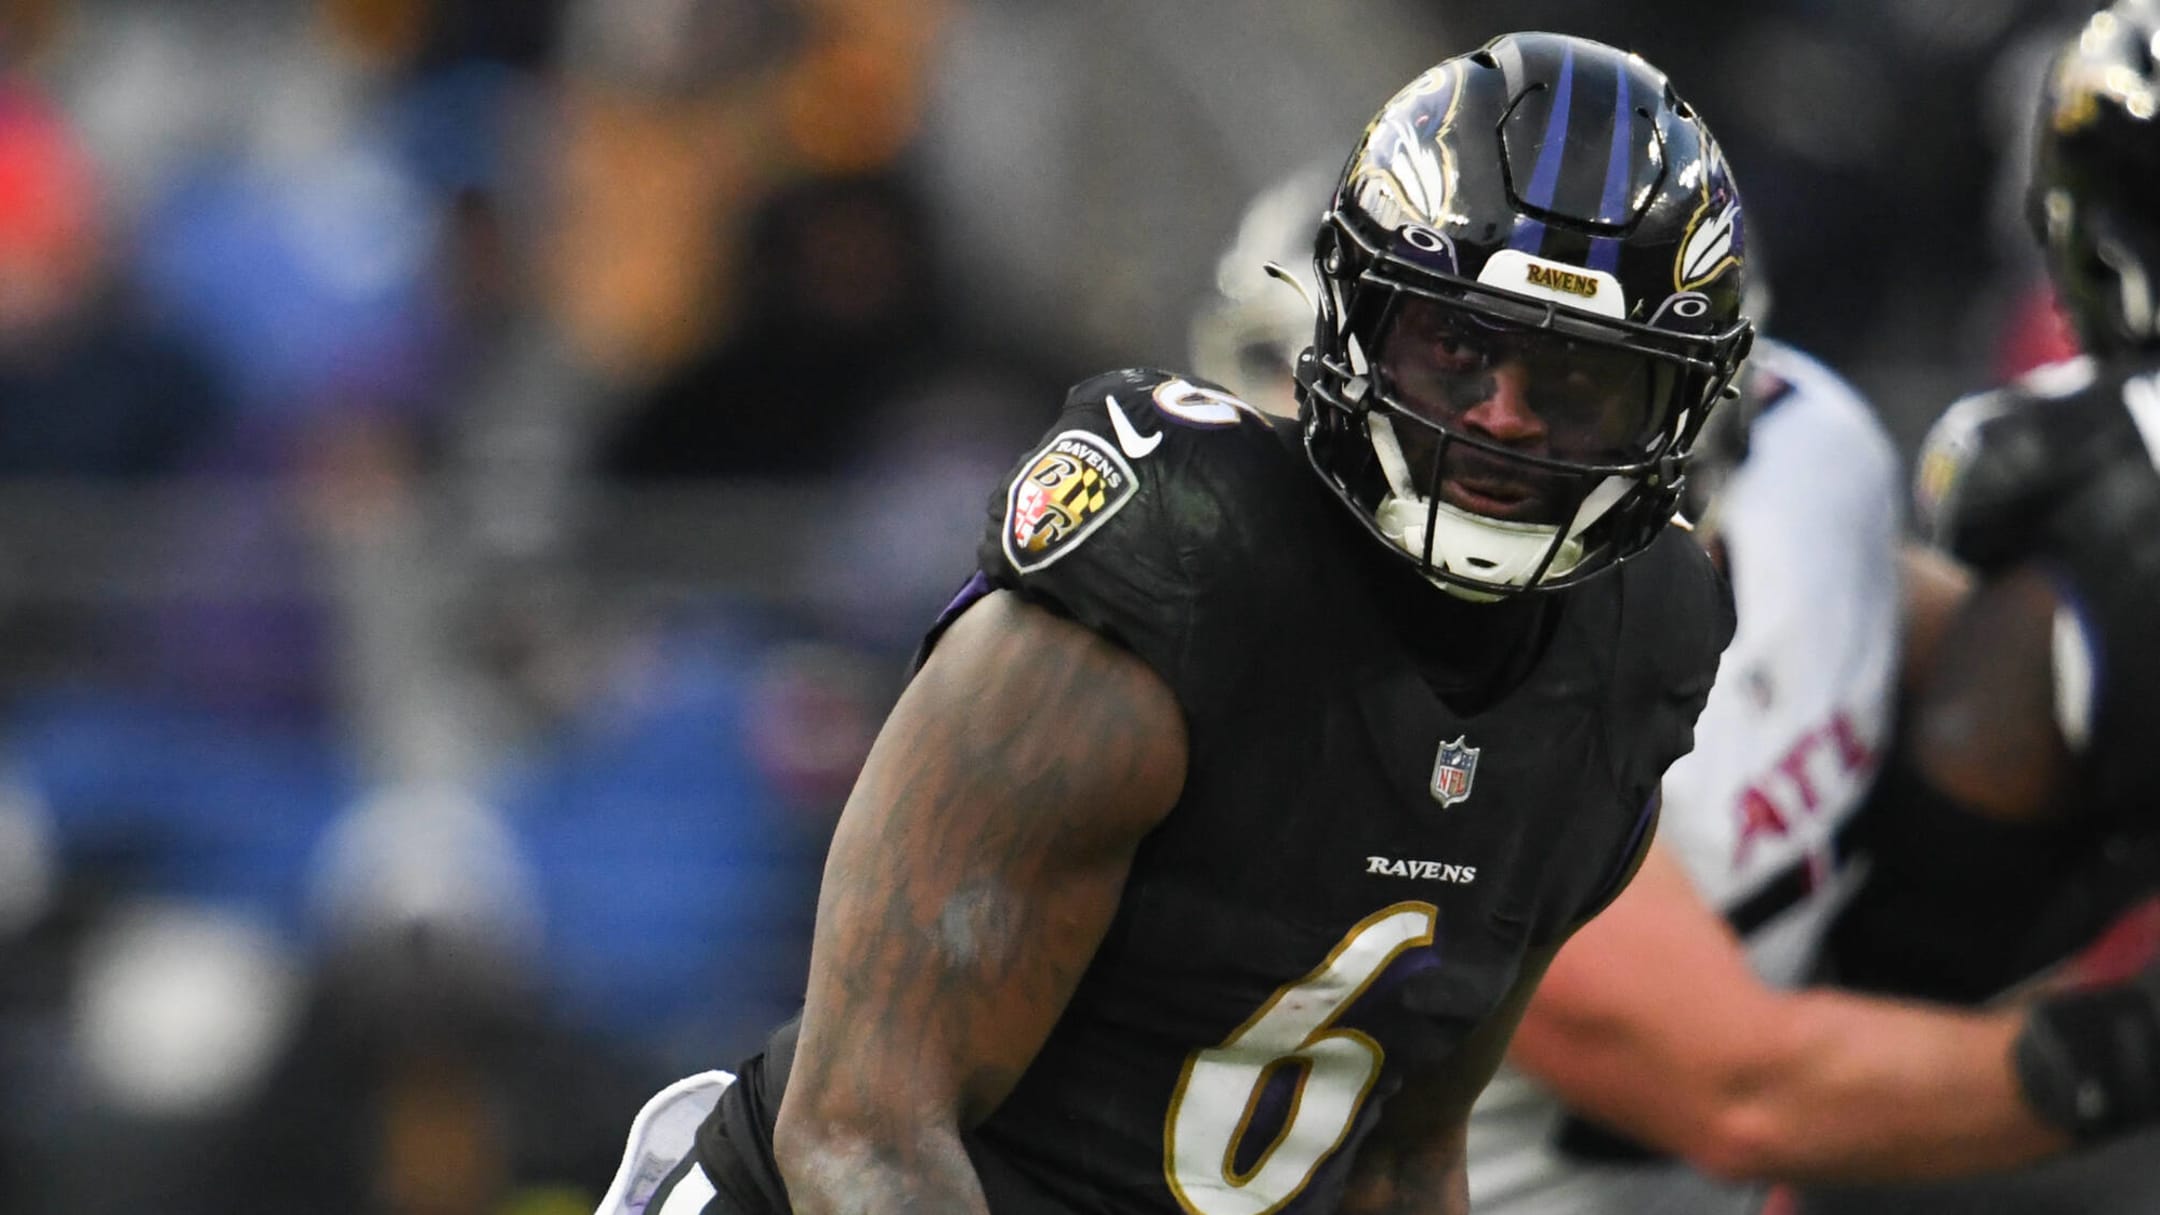 Why LB Patrick Queen's future with Ravens remains uncertain